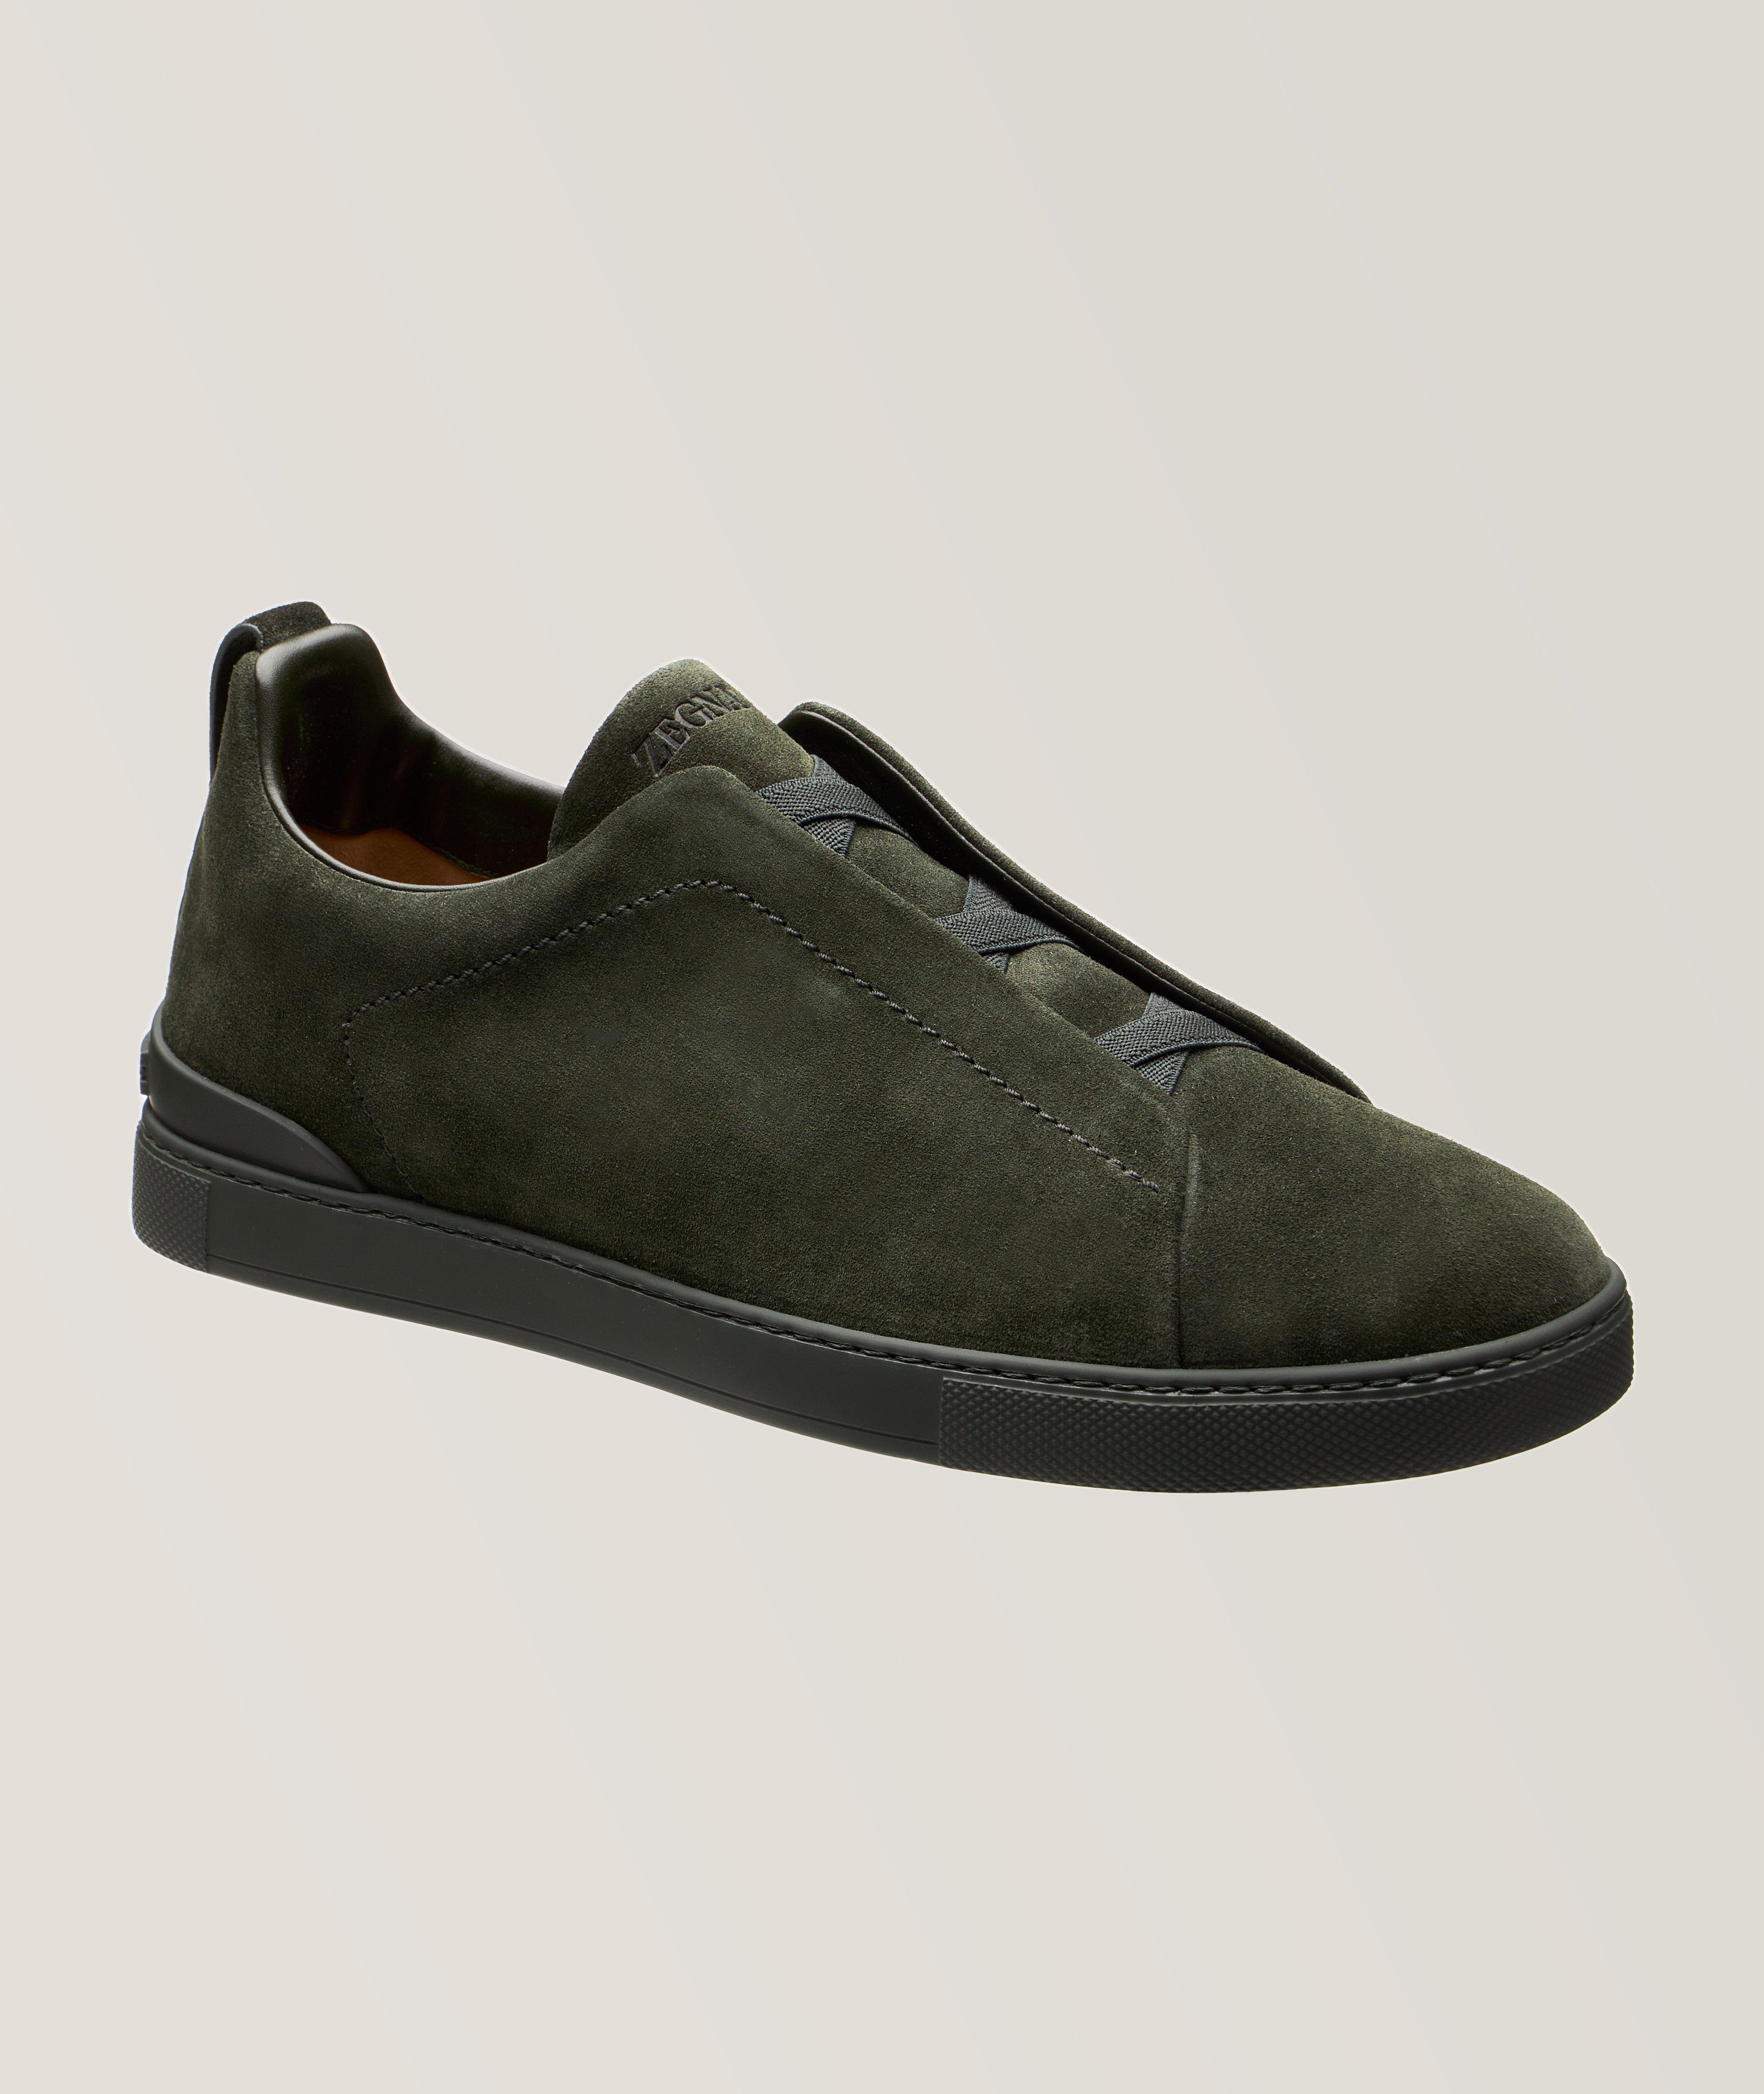 Zegna Triple Stitch Tonal Suede Slip-On Sneakers